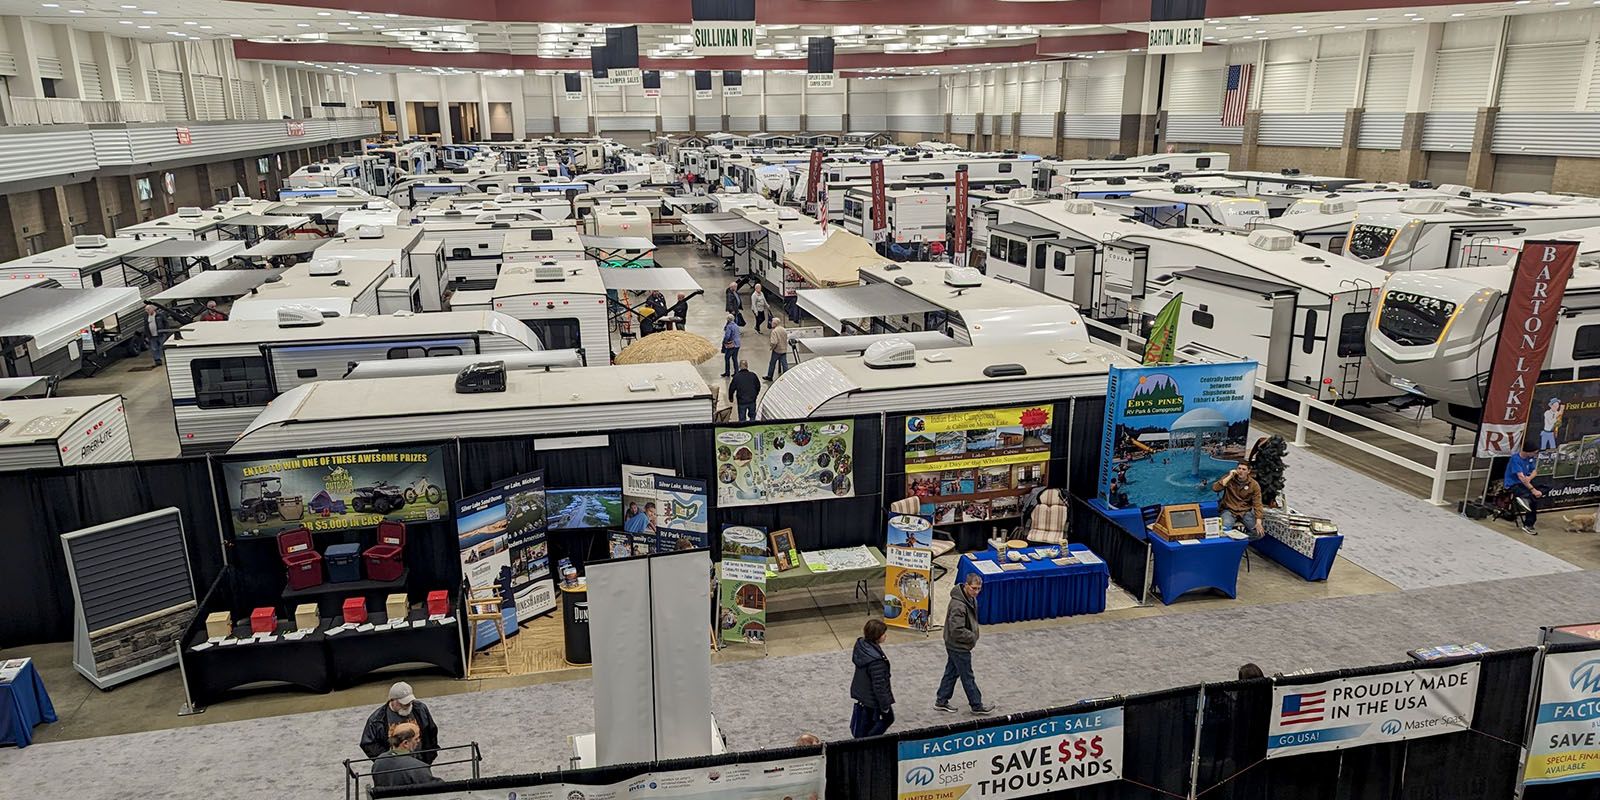 The Fort Wayne RV & Camping Show will be Feb. 1-4 at Memorial Coliseum.